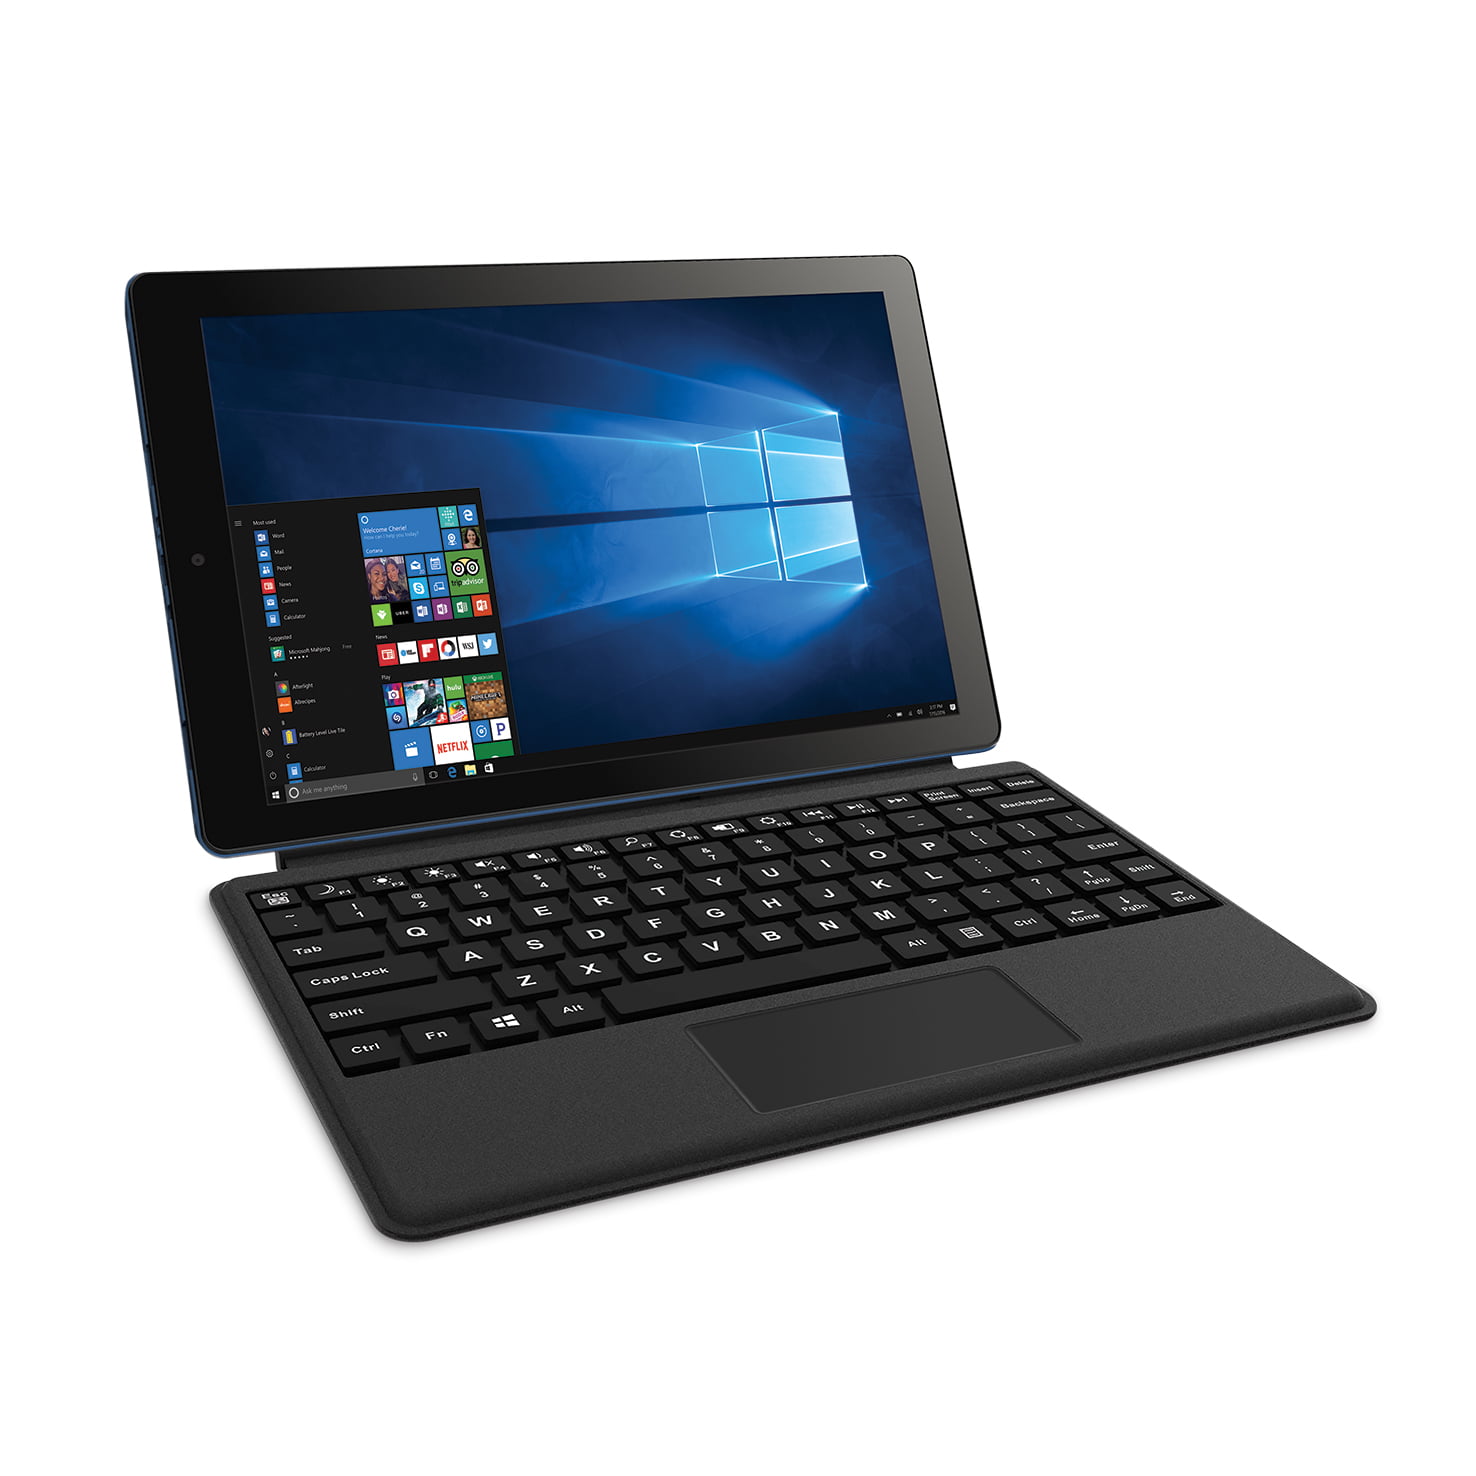 RCA Cambio 10.1 (2-in-1) Windows Tablet & Keyboard, Charcoal 